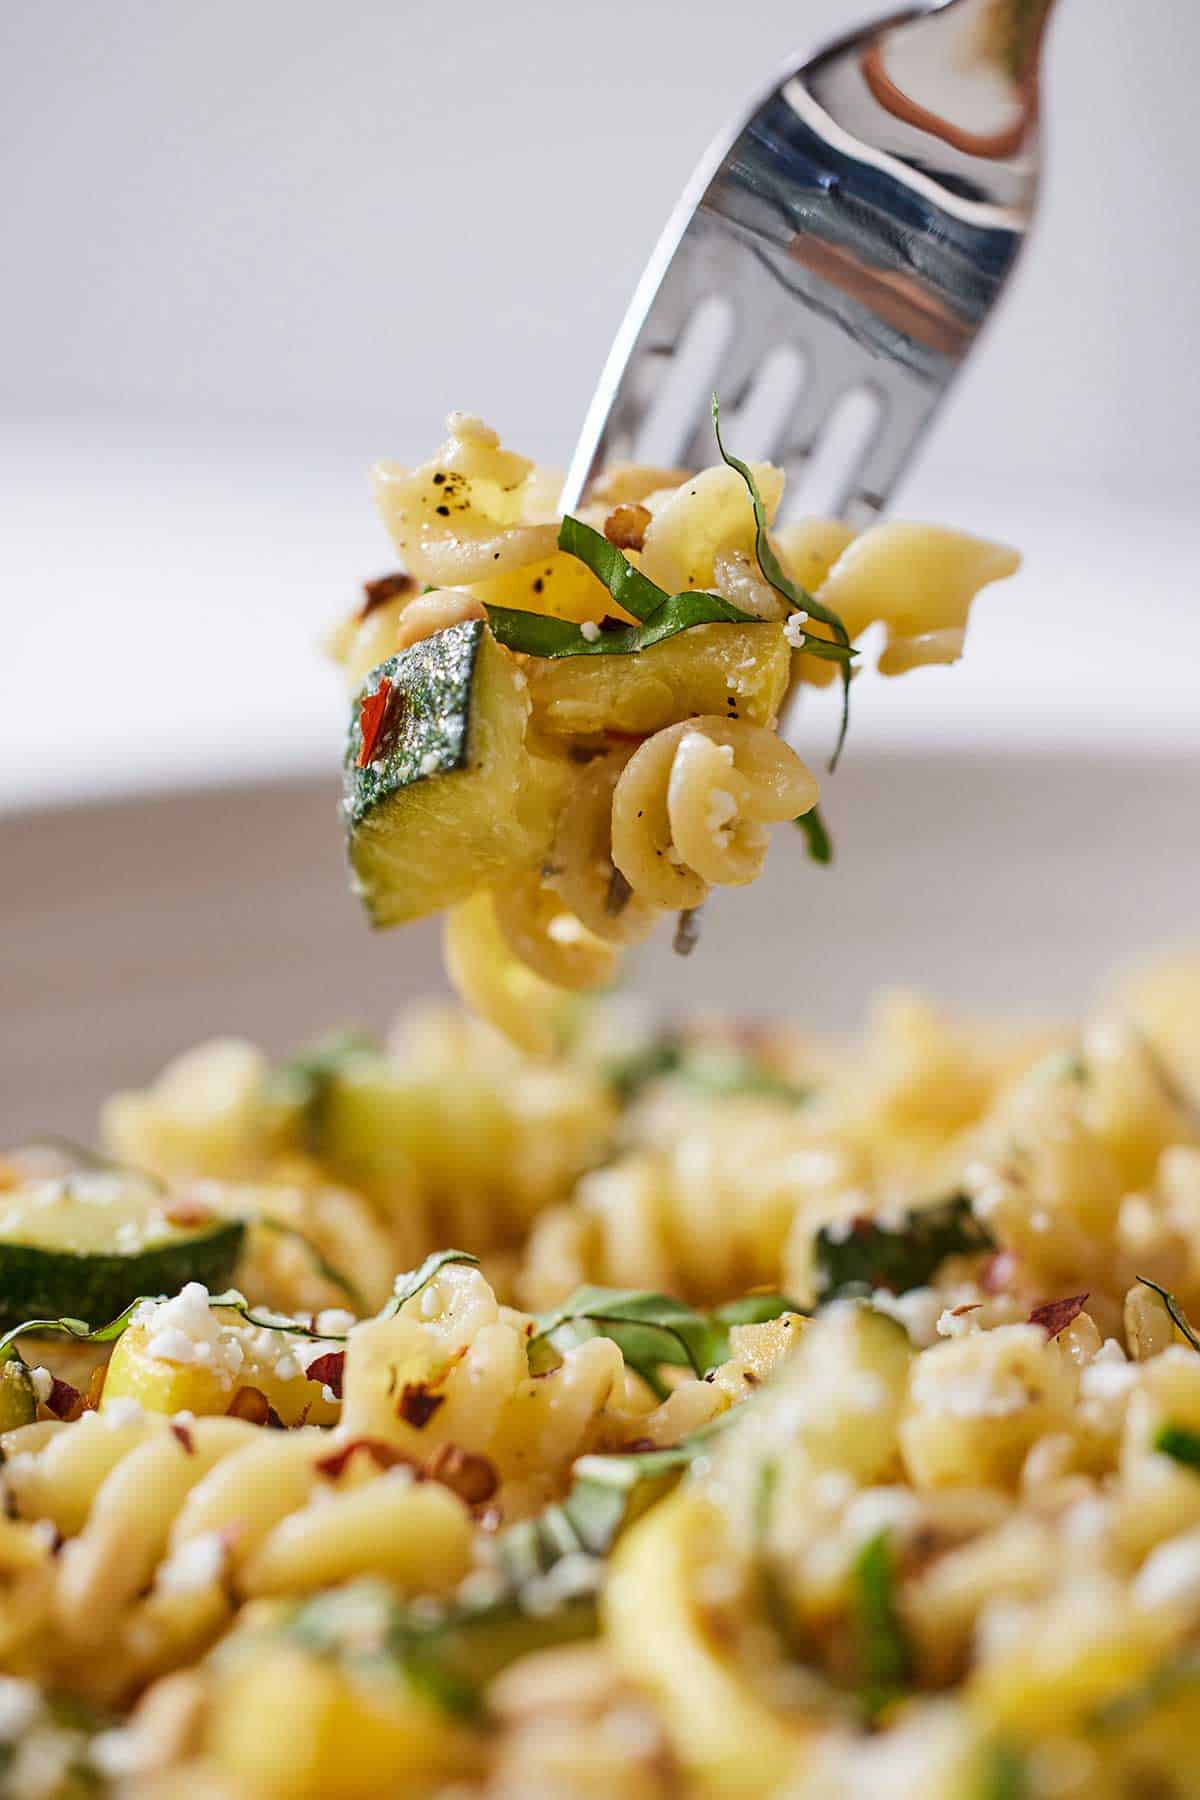 A forkful of summer squash pasta lifted from a bowl of pasta.